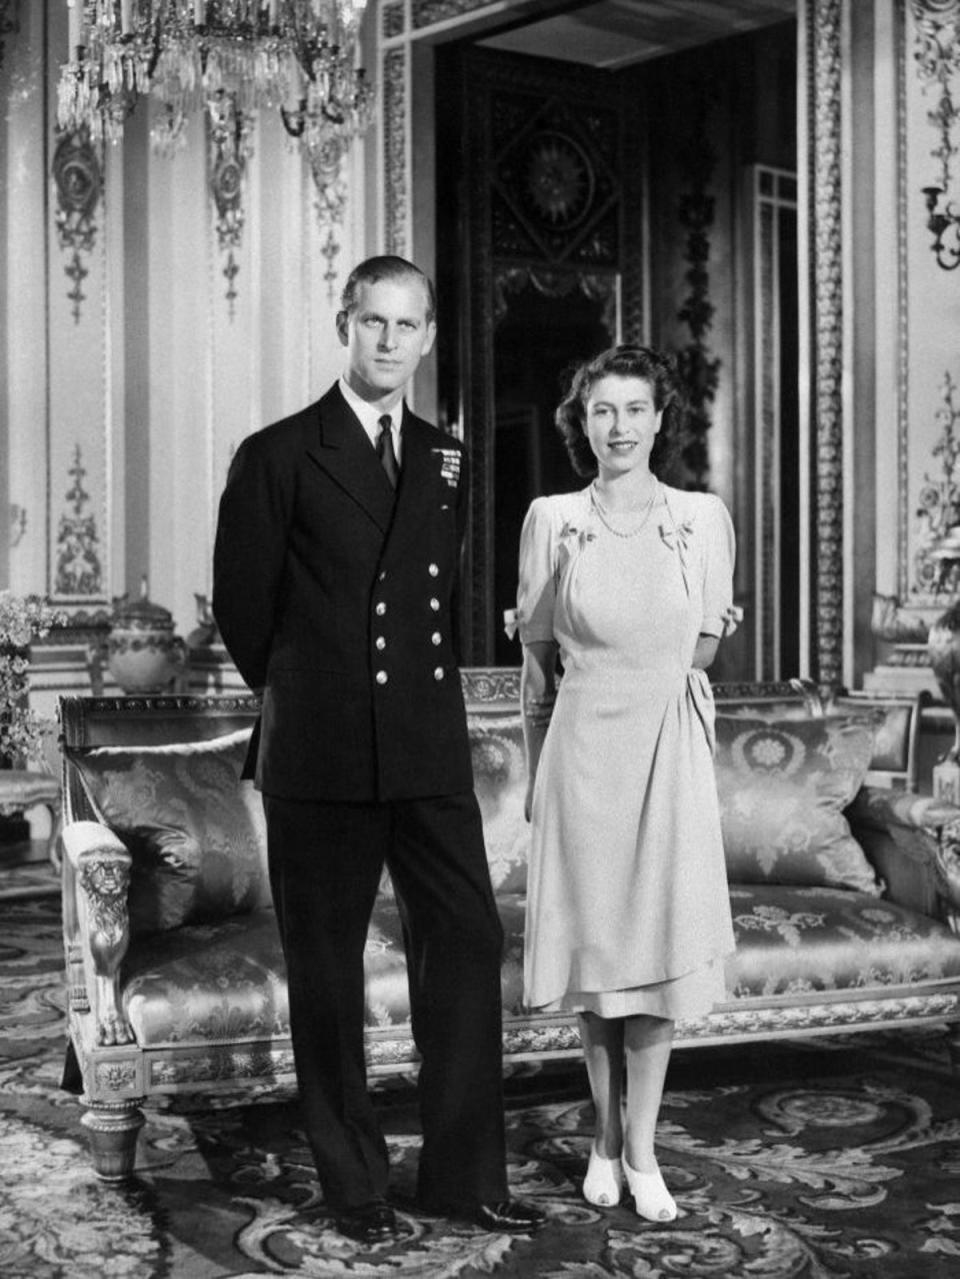 Queen Elizabeth II: The official announcement of Princess Elizabeth and Phillip Mountbatten's engagement. The pairing was incredibly controversial as Prince Phillip had no financial standing and he was foreign born, the prince of Denmark and Greece (though he served Britain in the war and was given British Citizenship), 1947 (Getty)